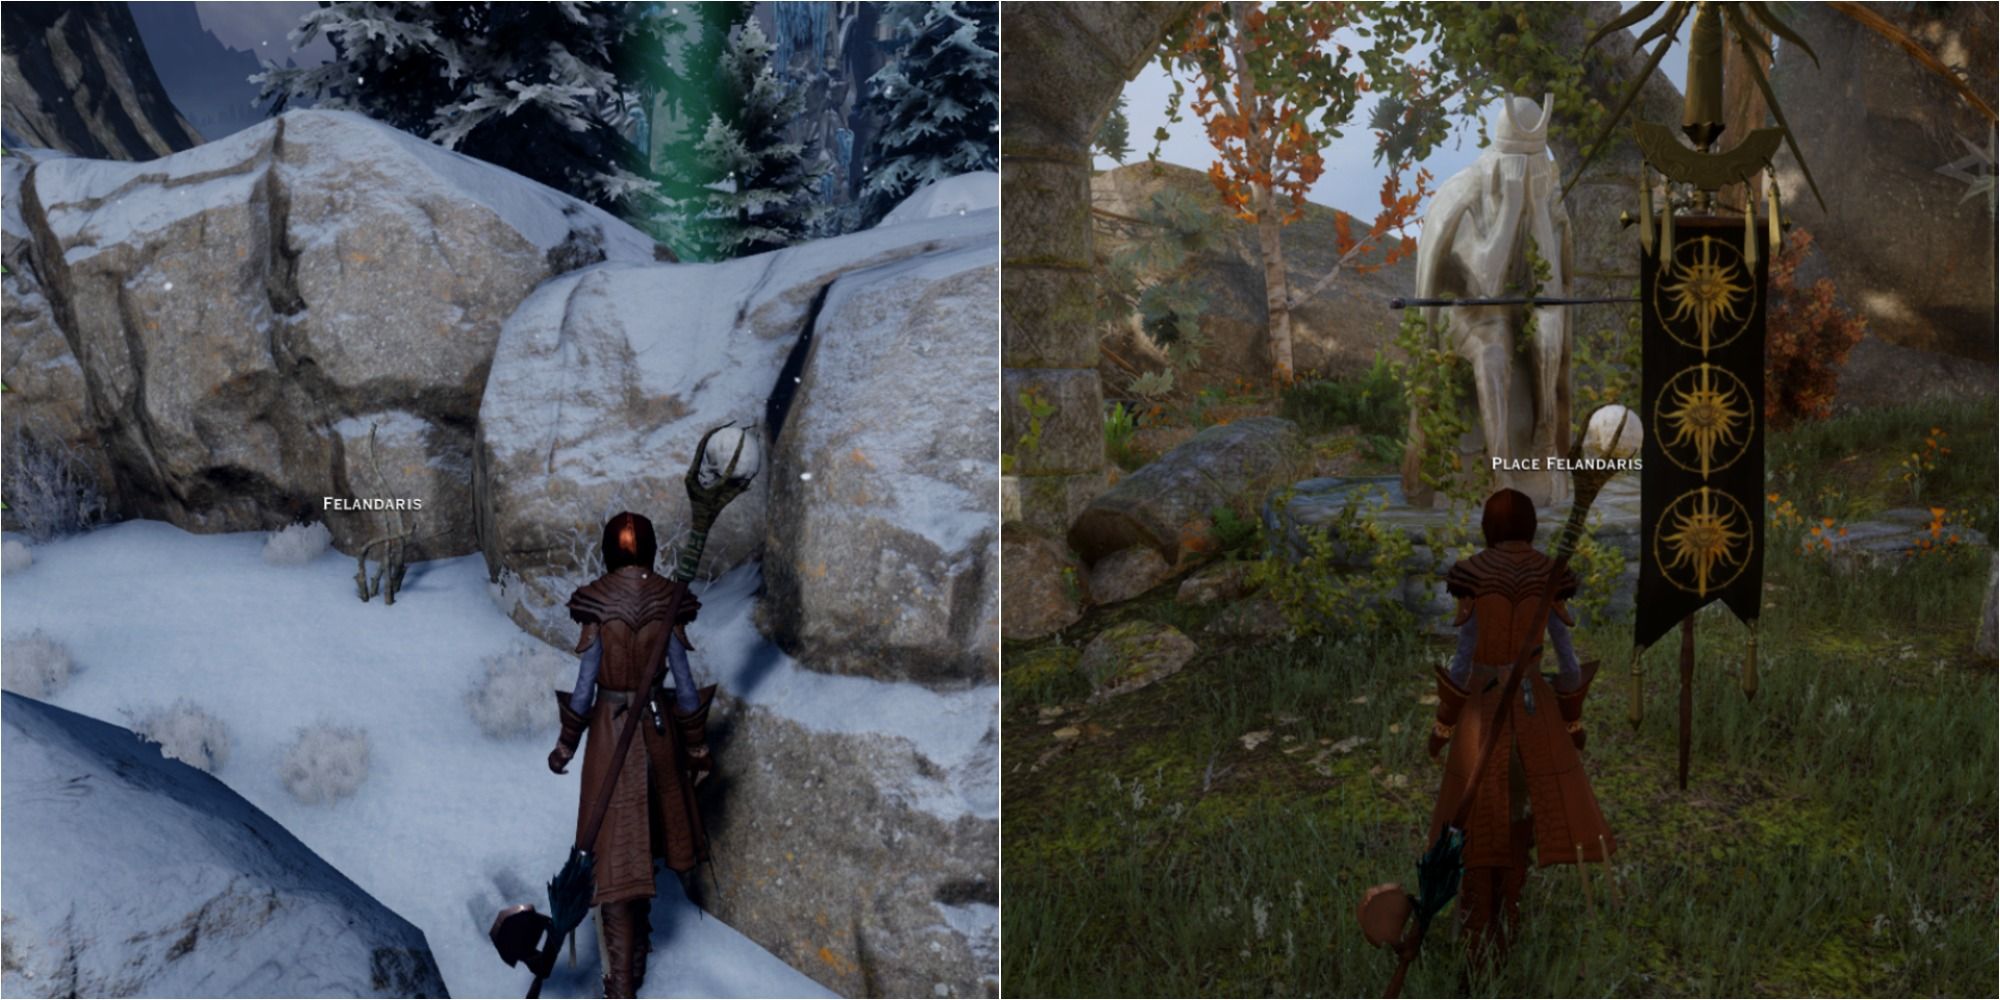 Dragon Age Inquisition Letter From A Lover Featured Split Image of Finding and Giving Felandaris